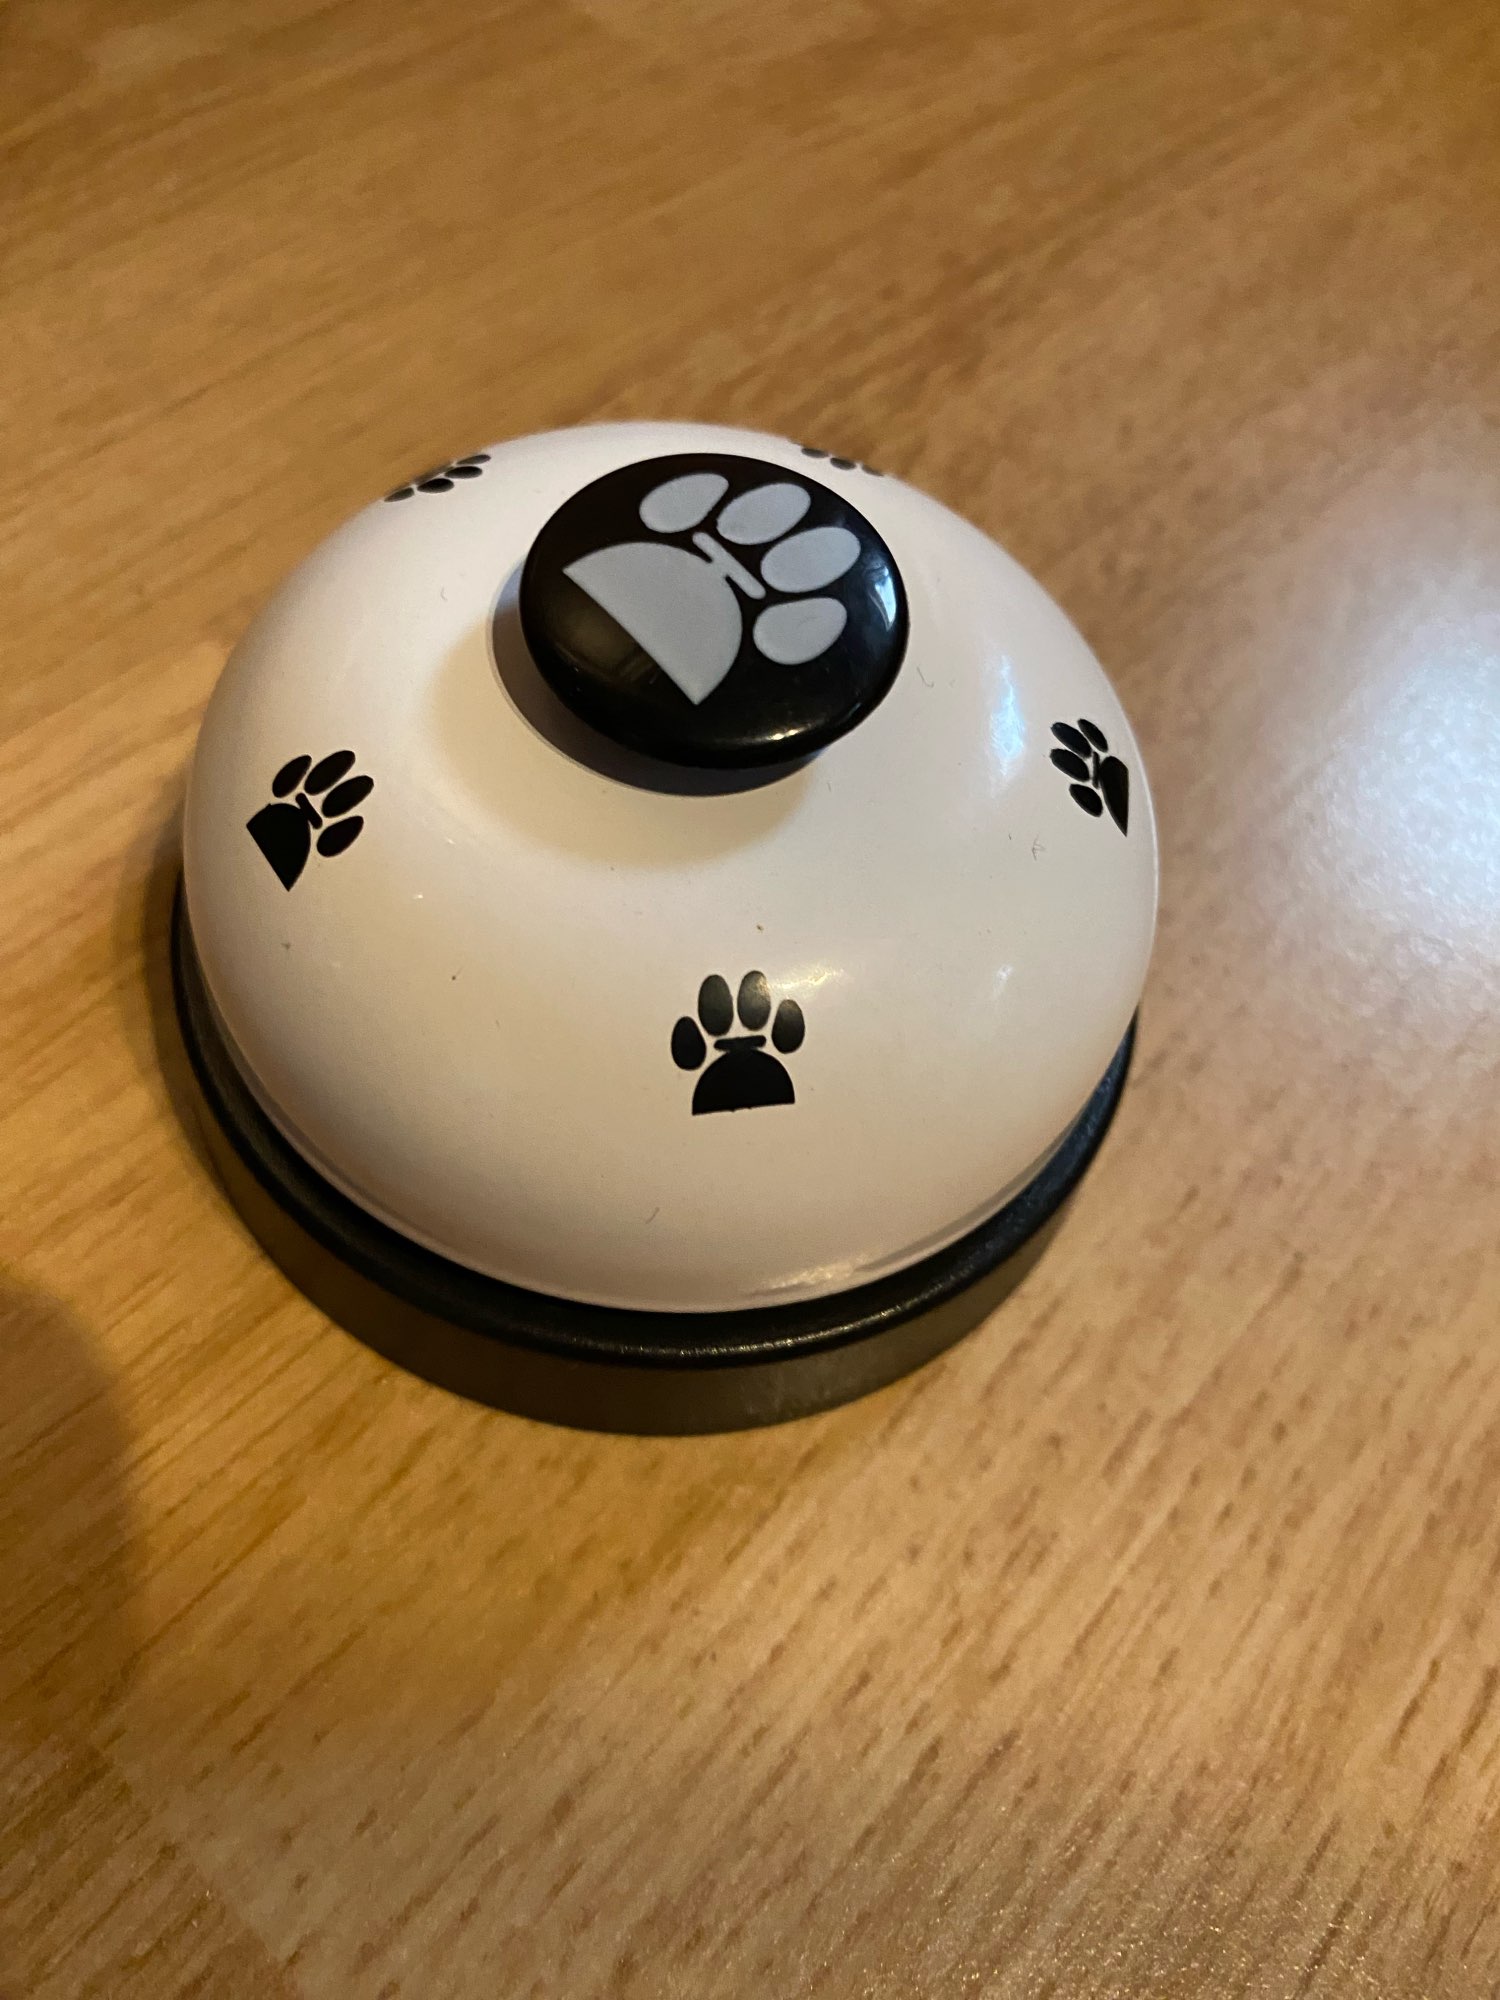 Dinner Bell Pet Training Toy for Dog Cat - Interactive Food Feed Reminder photo review